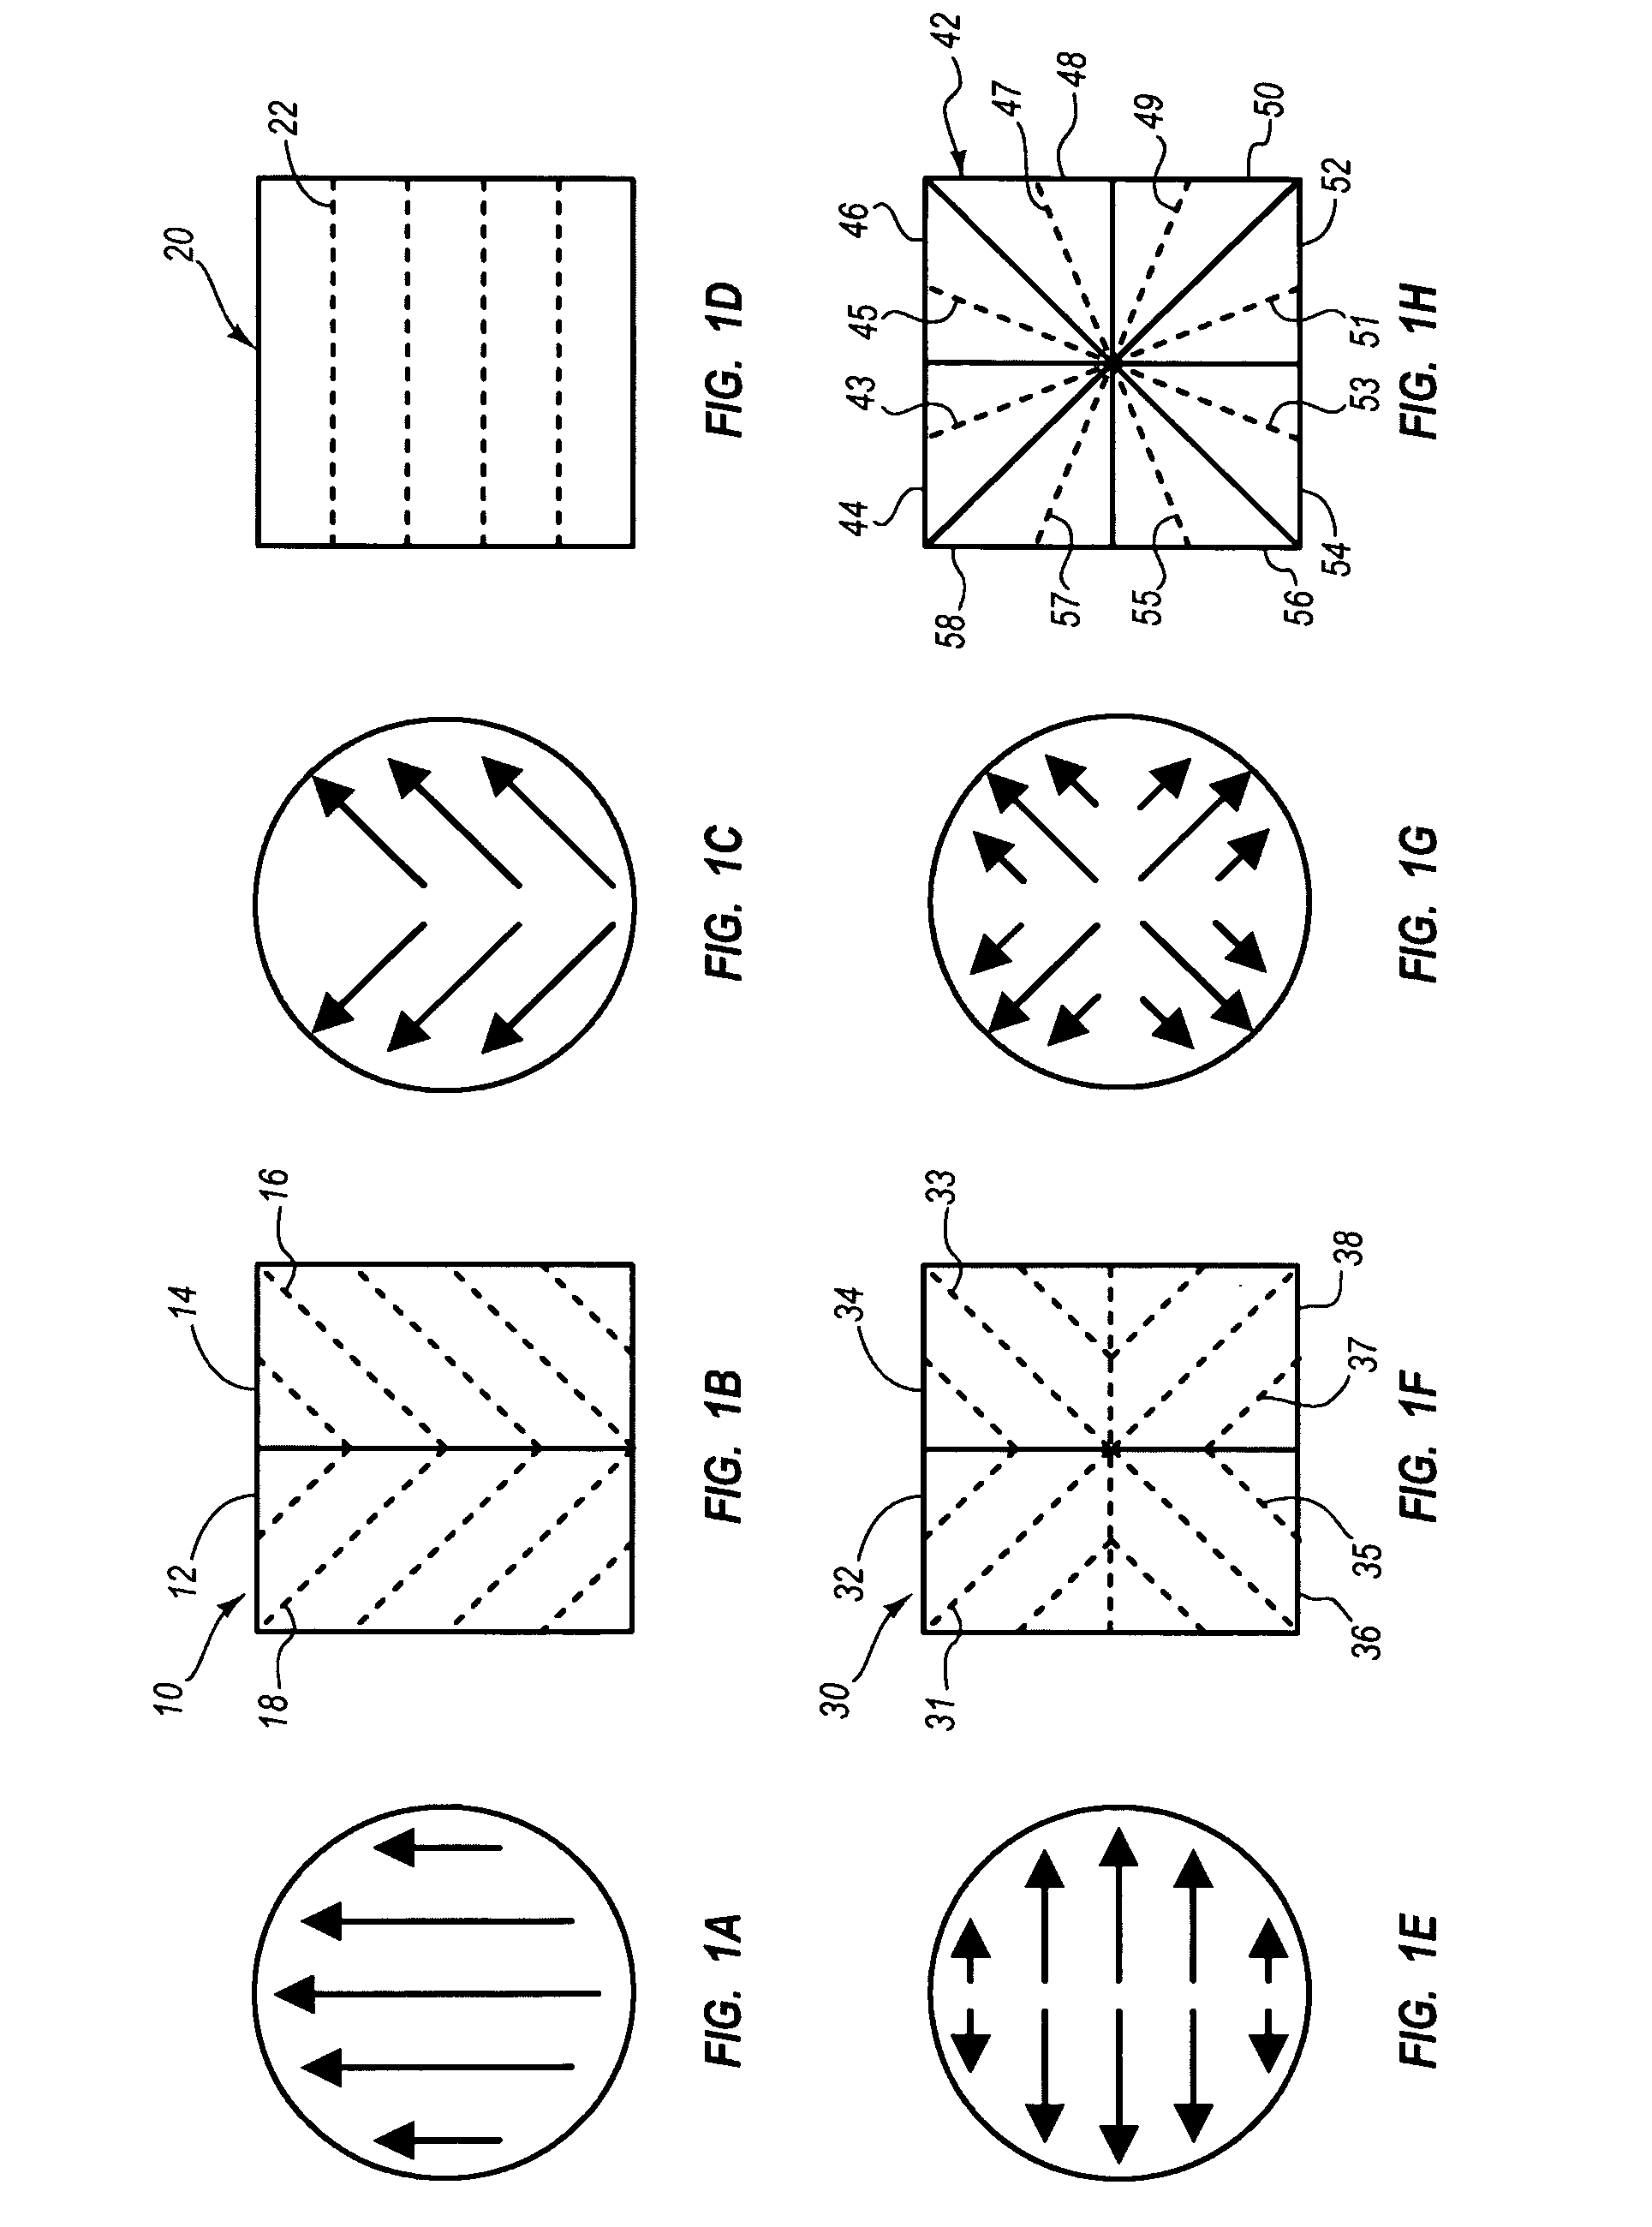 Light polarization converter for converting linearly polarized light into radially polarized light and related methods